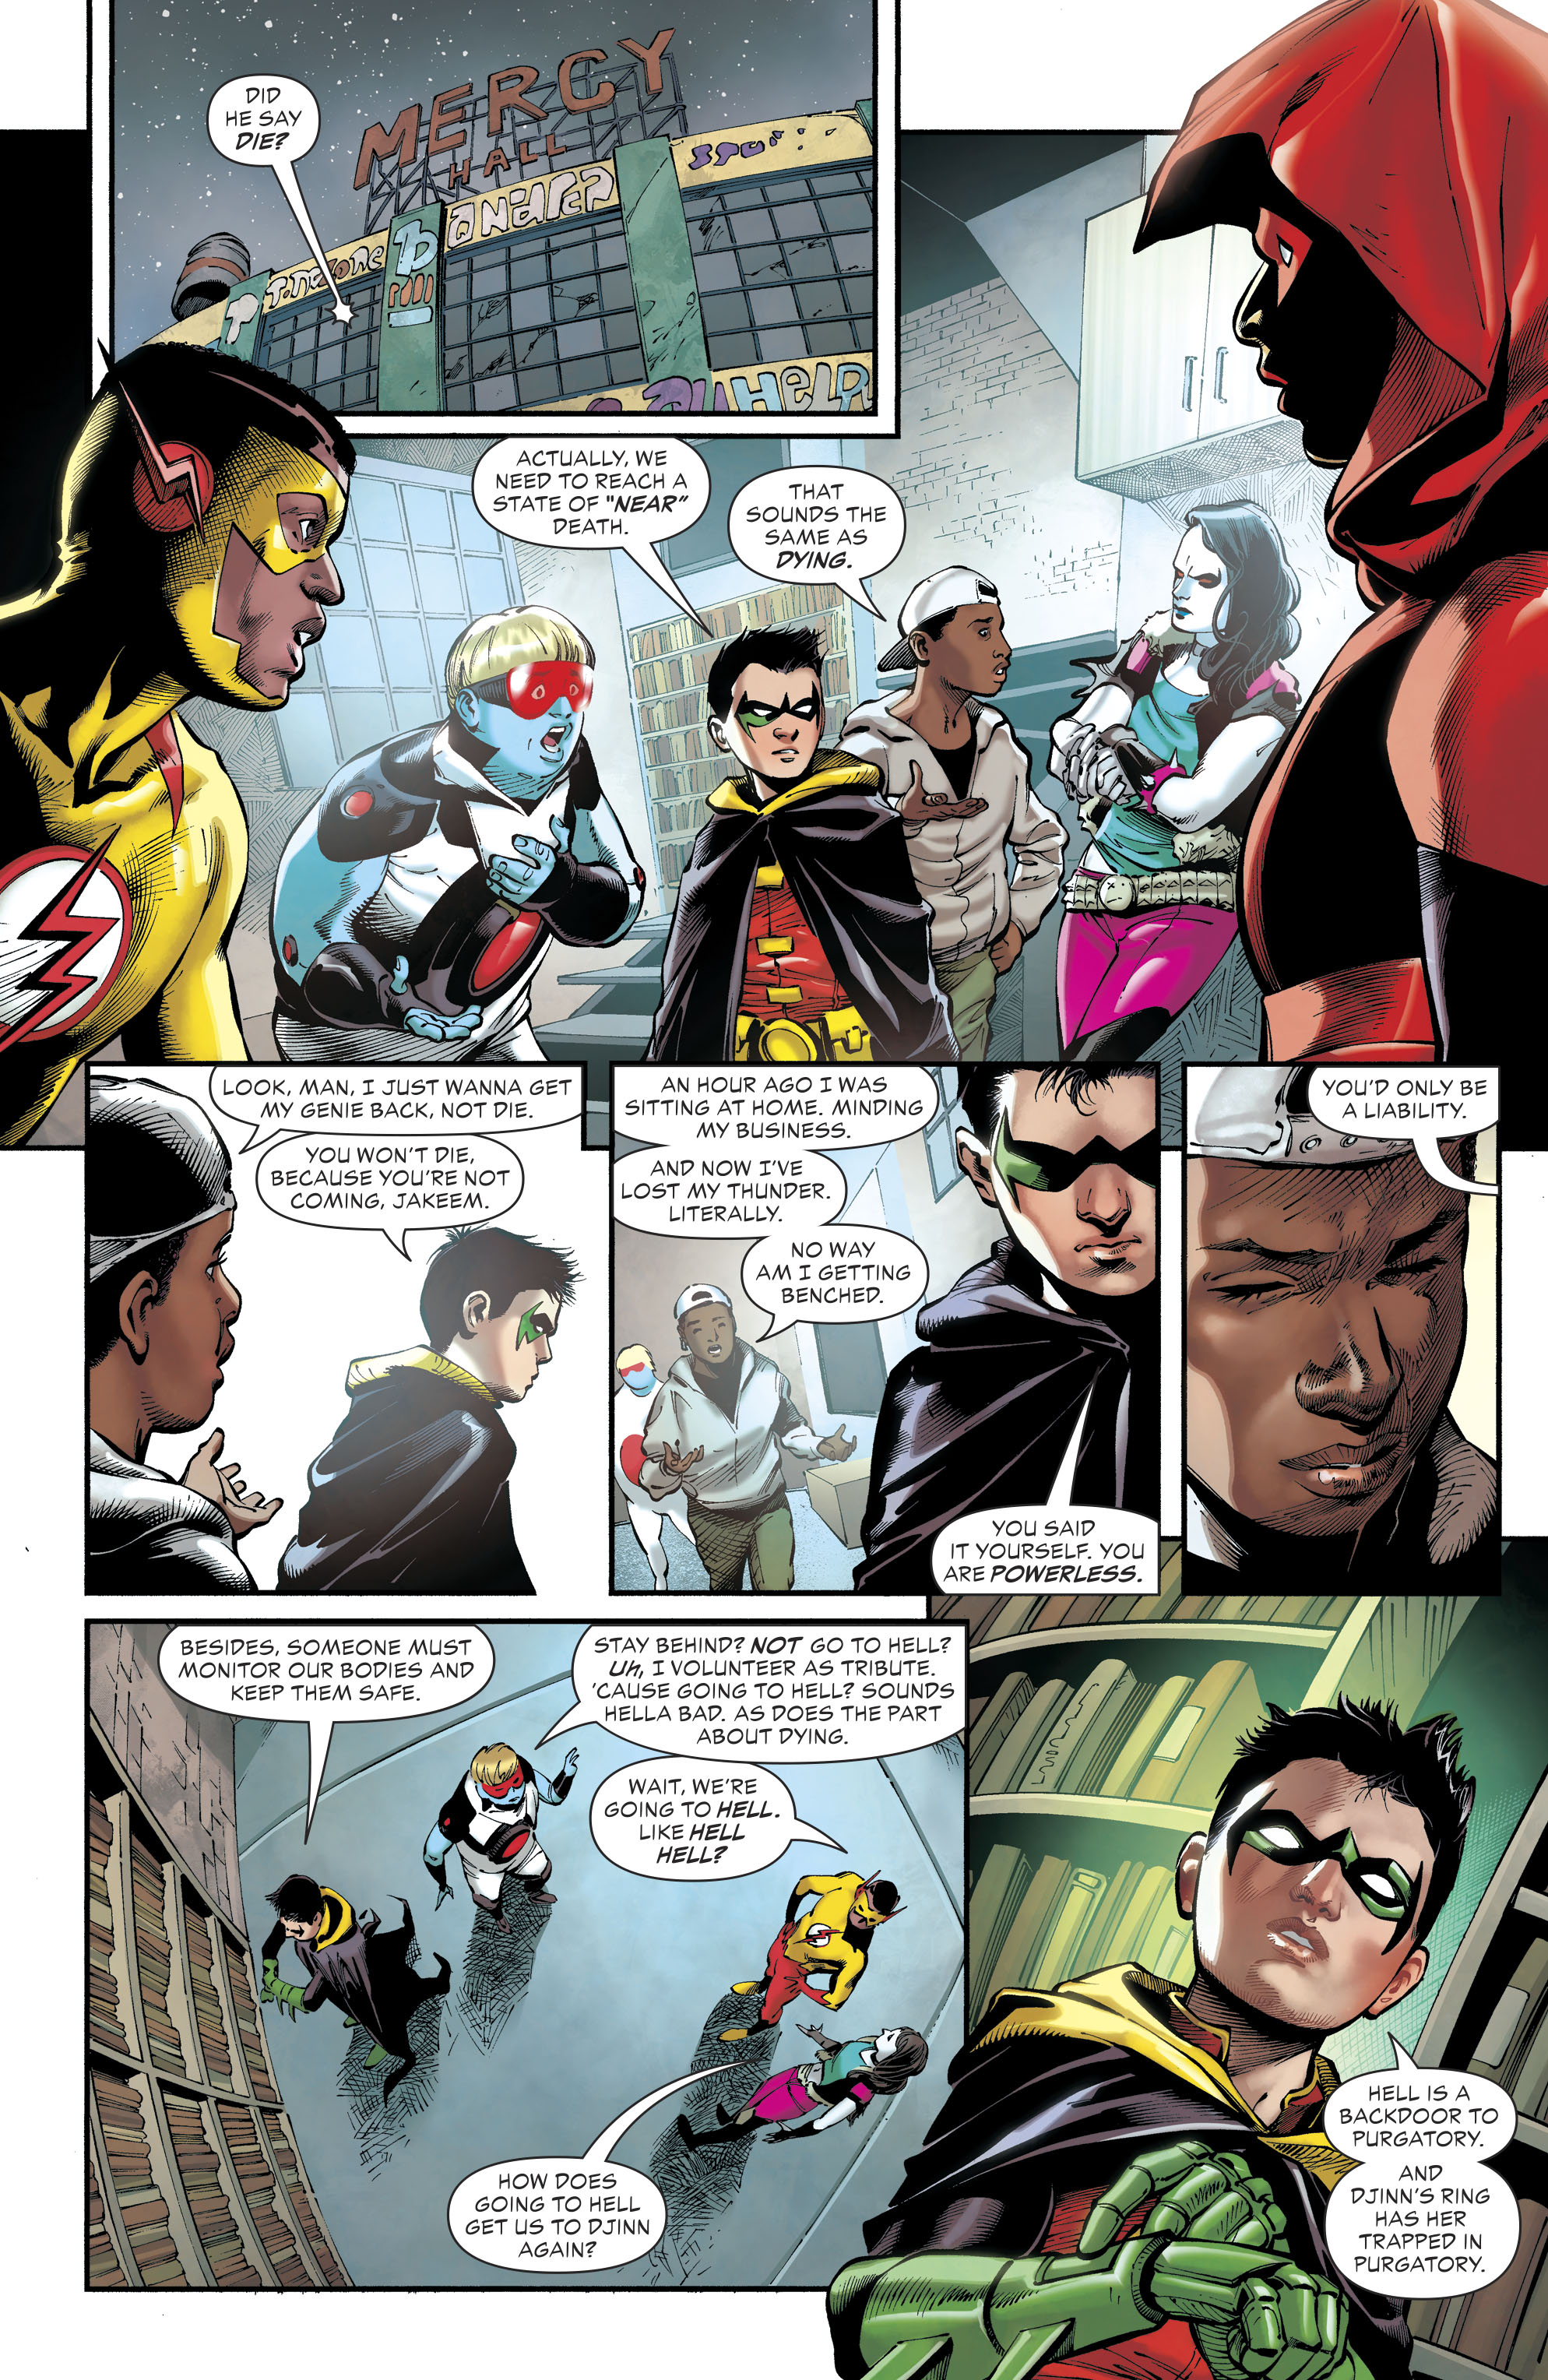 Teen Titans (2016-): Chapter 40 - Page 3